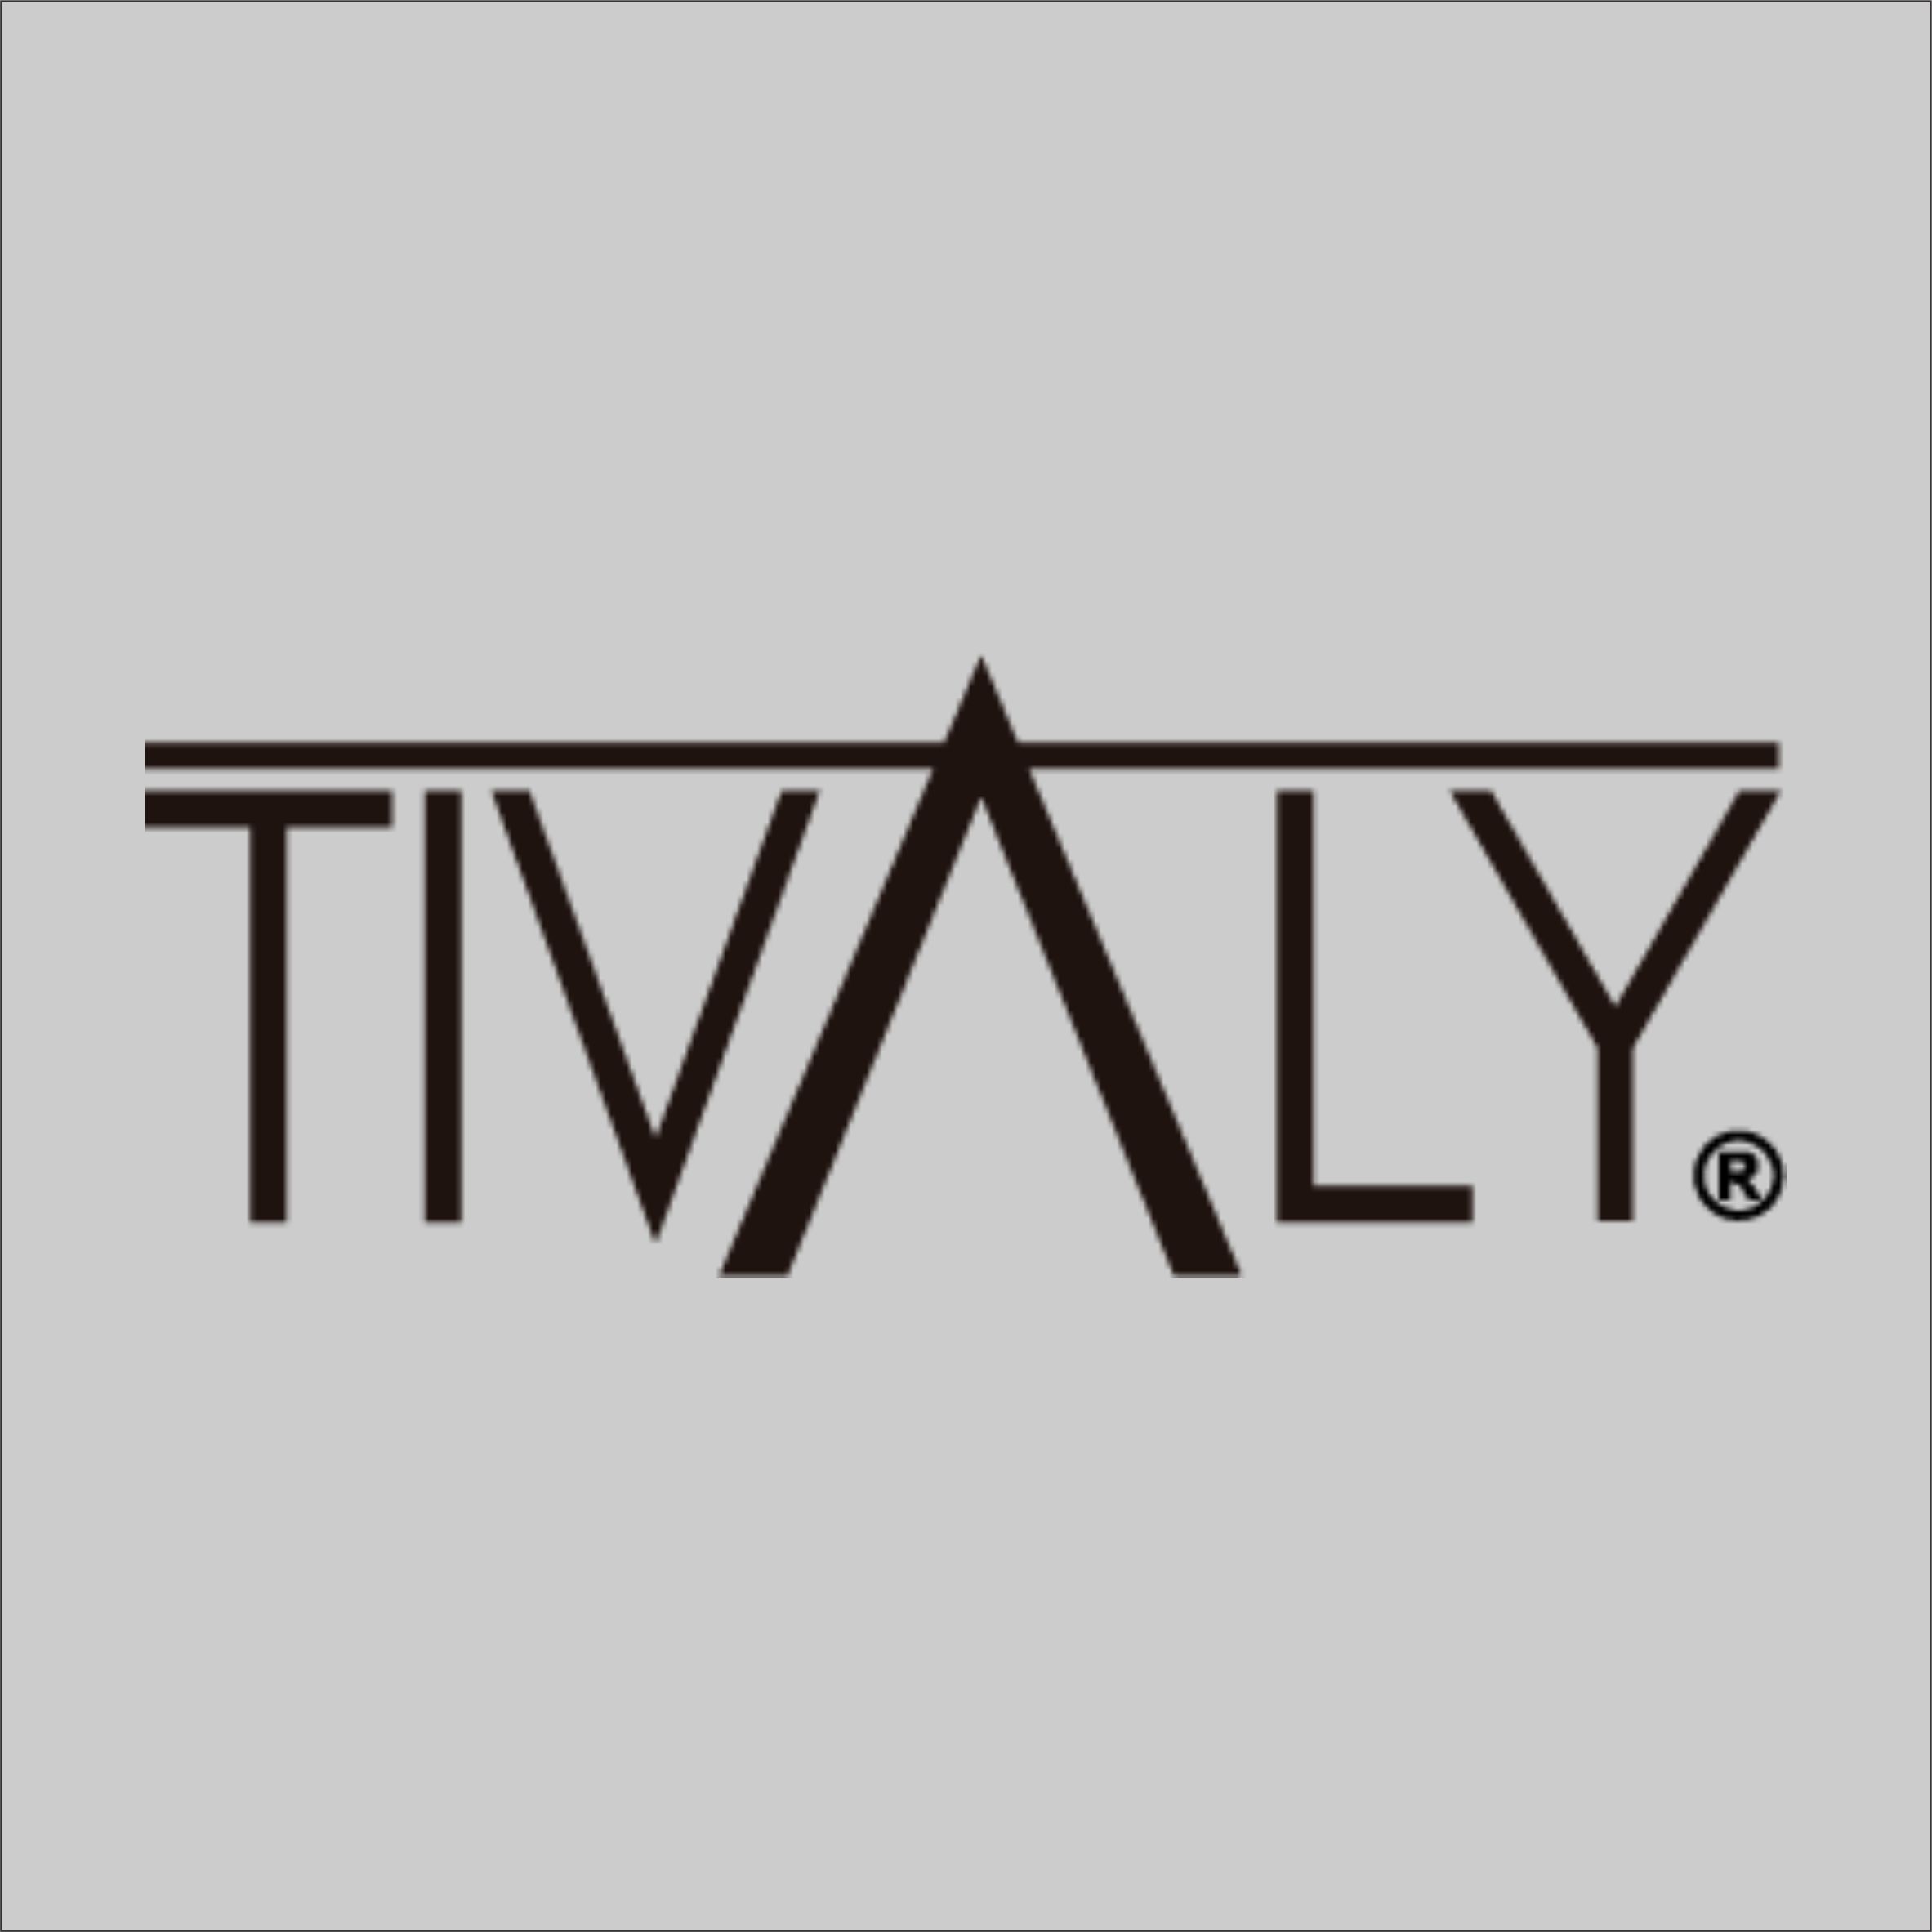 tivaly